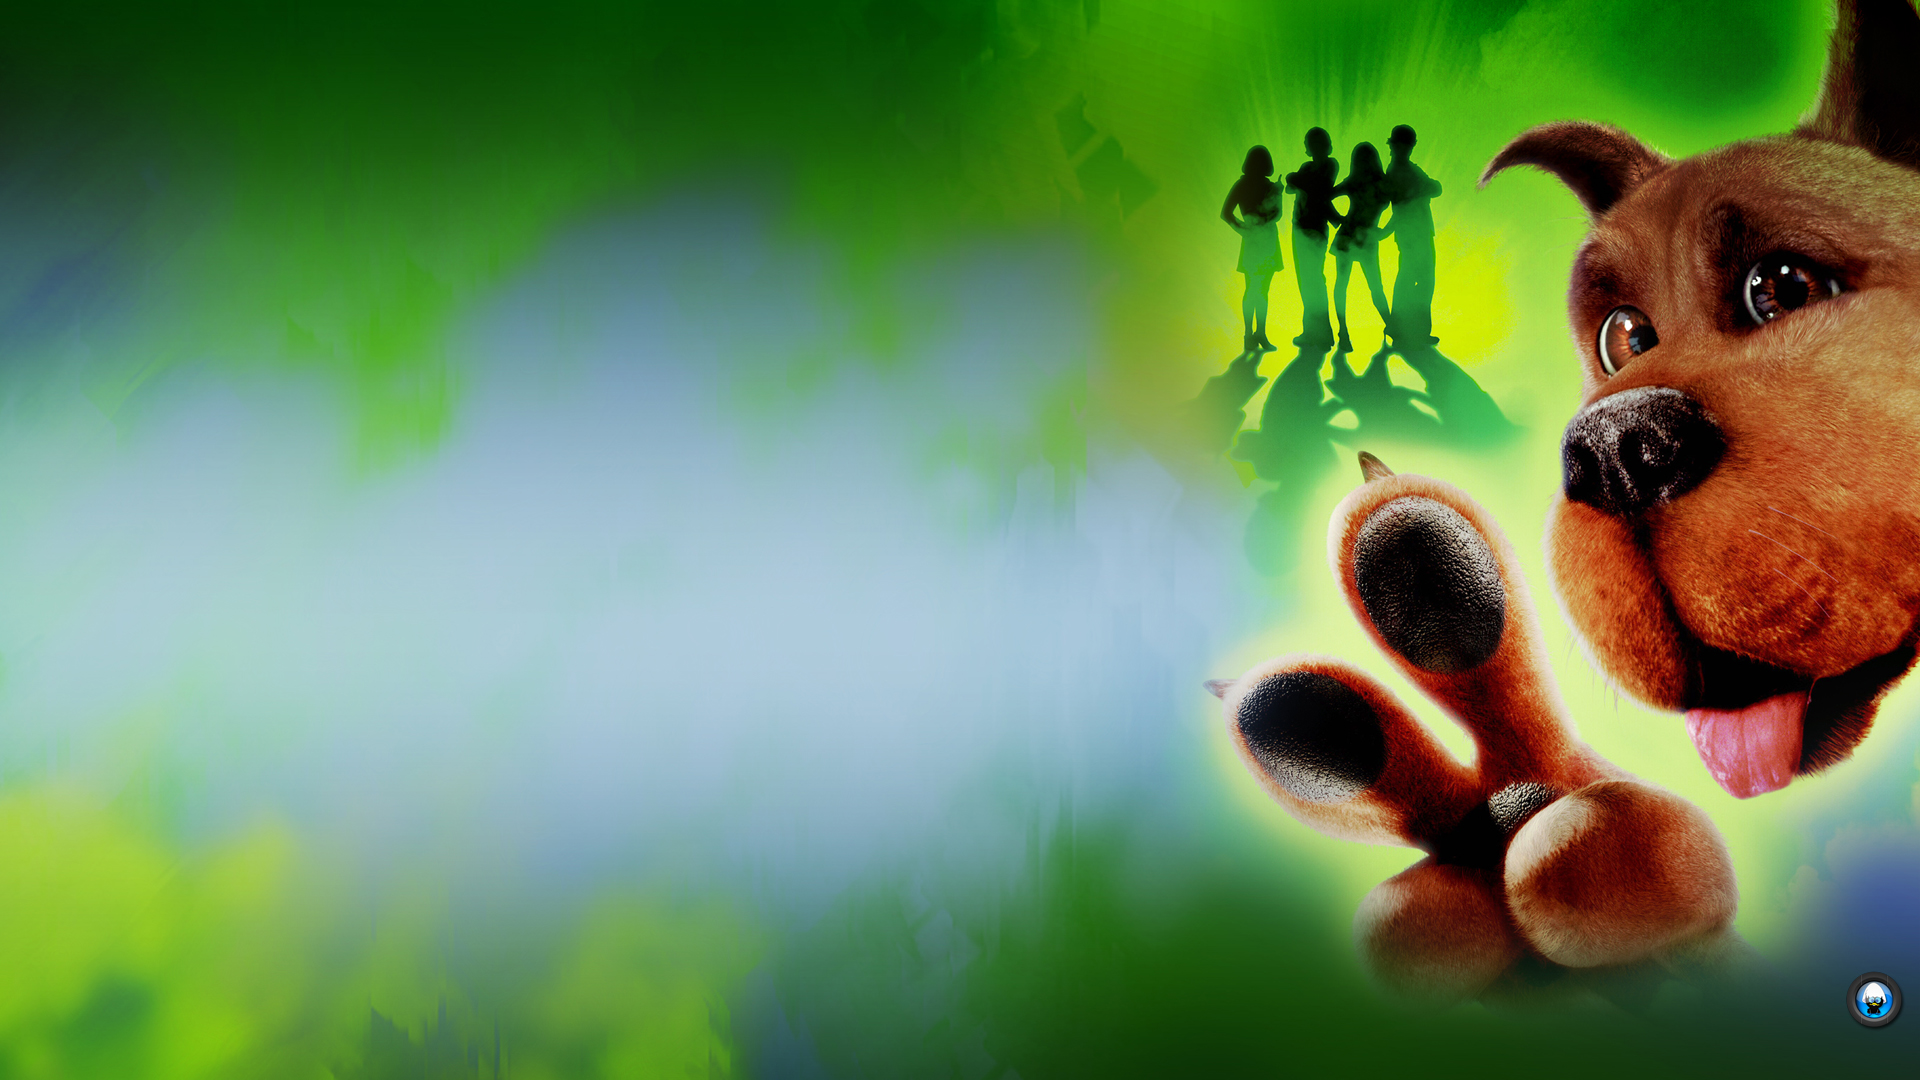 Scooby Doo Wallpaper Hebus Org High Definition